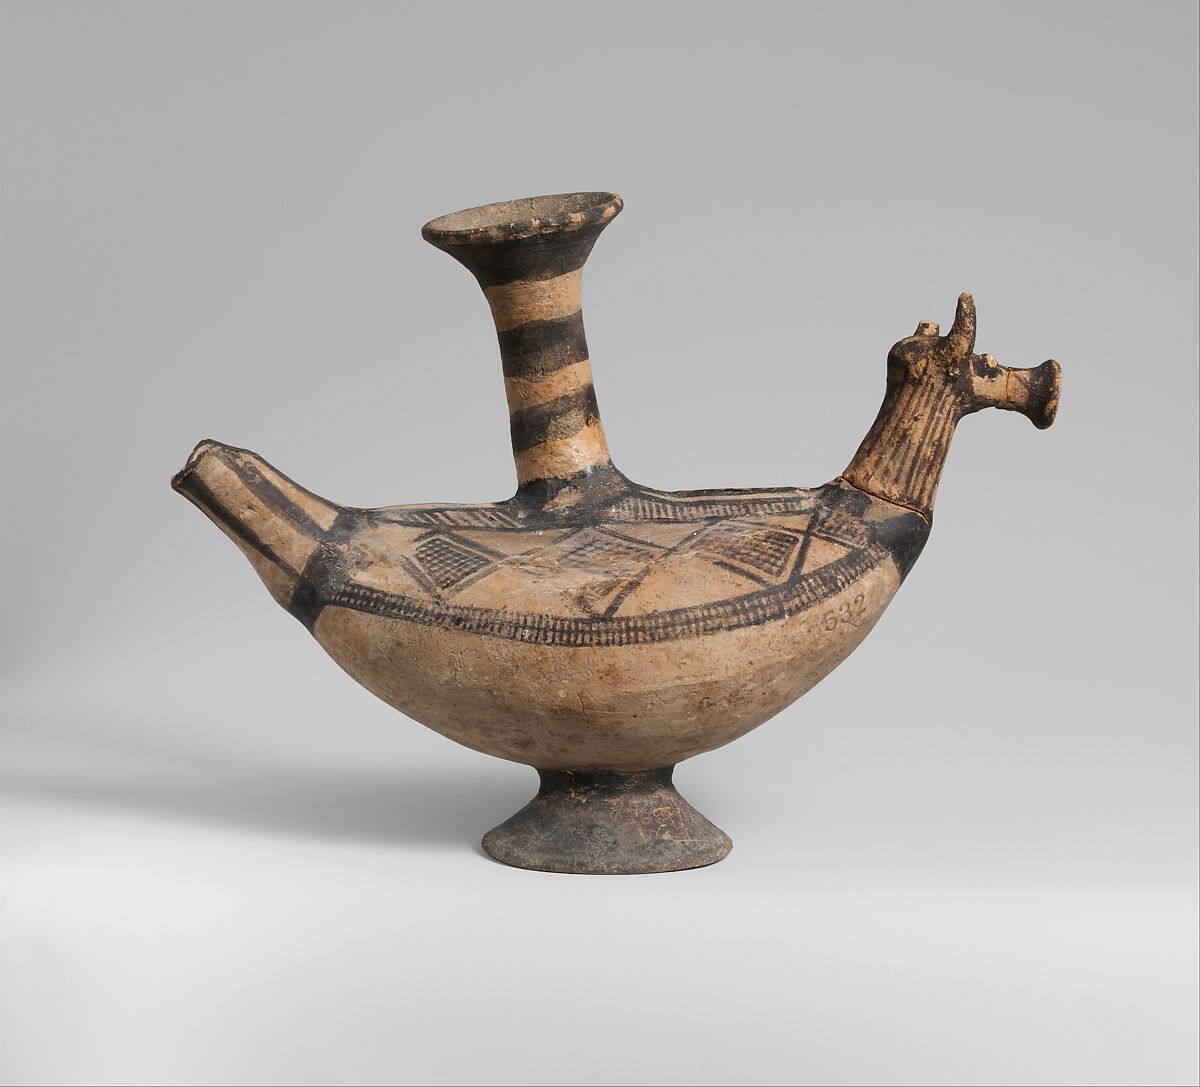 Terracotta vase in the form of an animal, Terracotta, Cypriot 